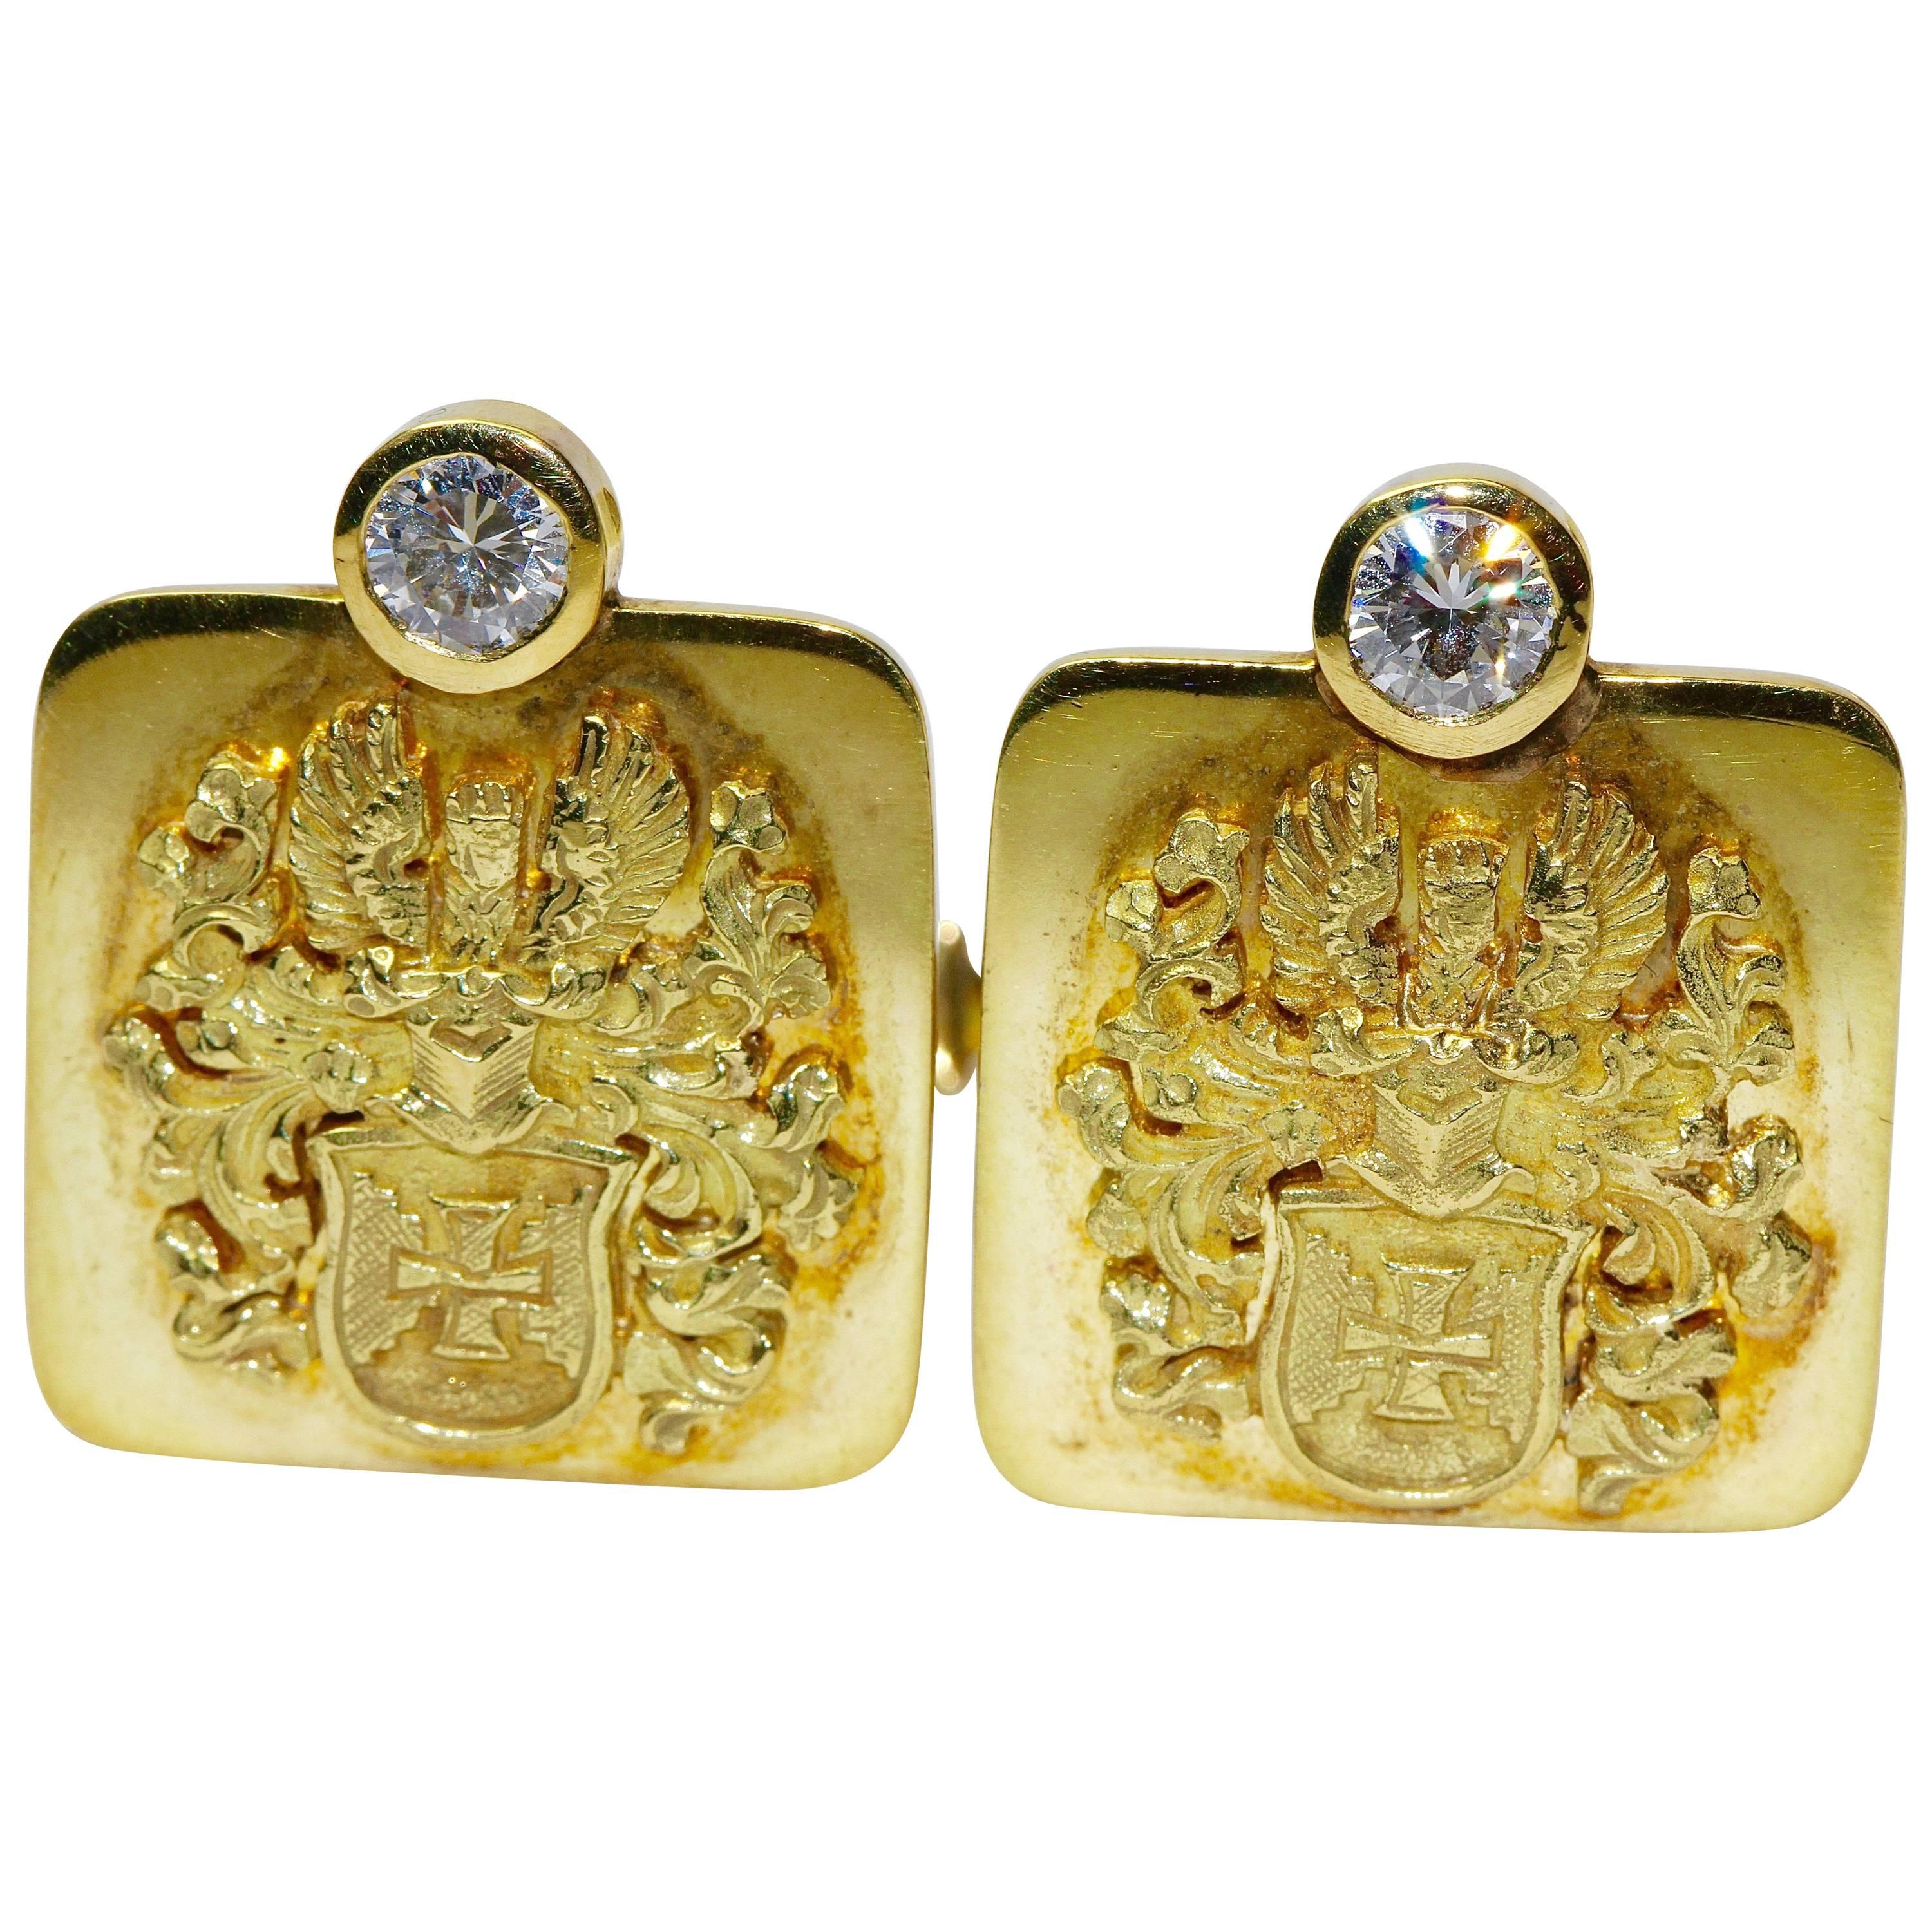 Pair of 18k Solid Gold Cufflinks with Diamonds Solitaire, Noble Coat of Arms